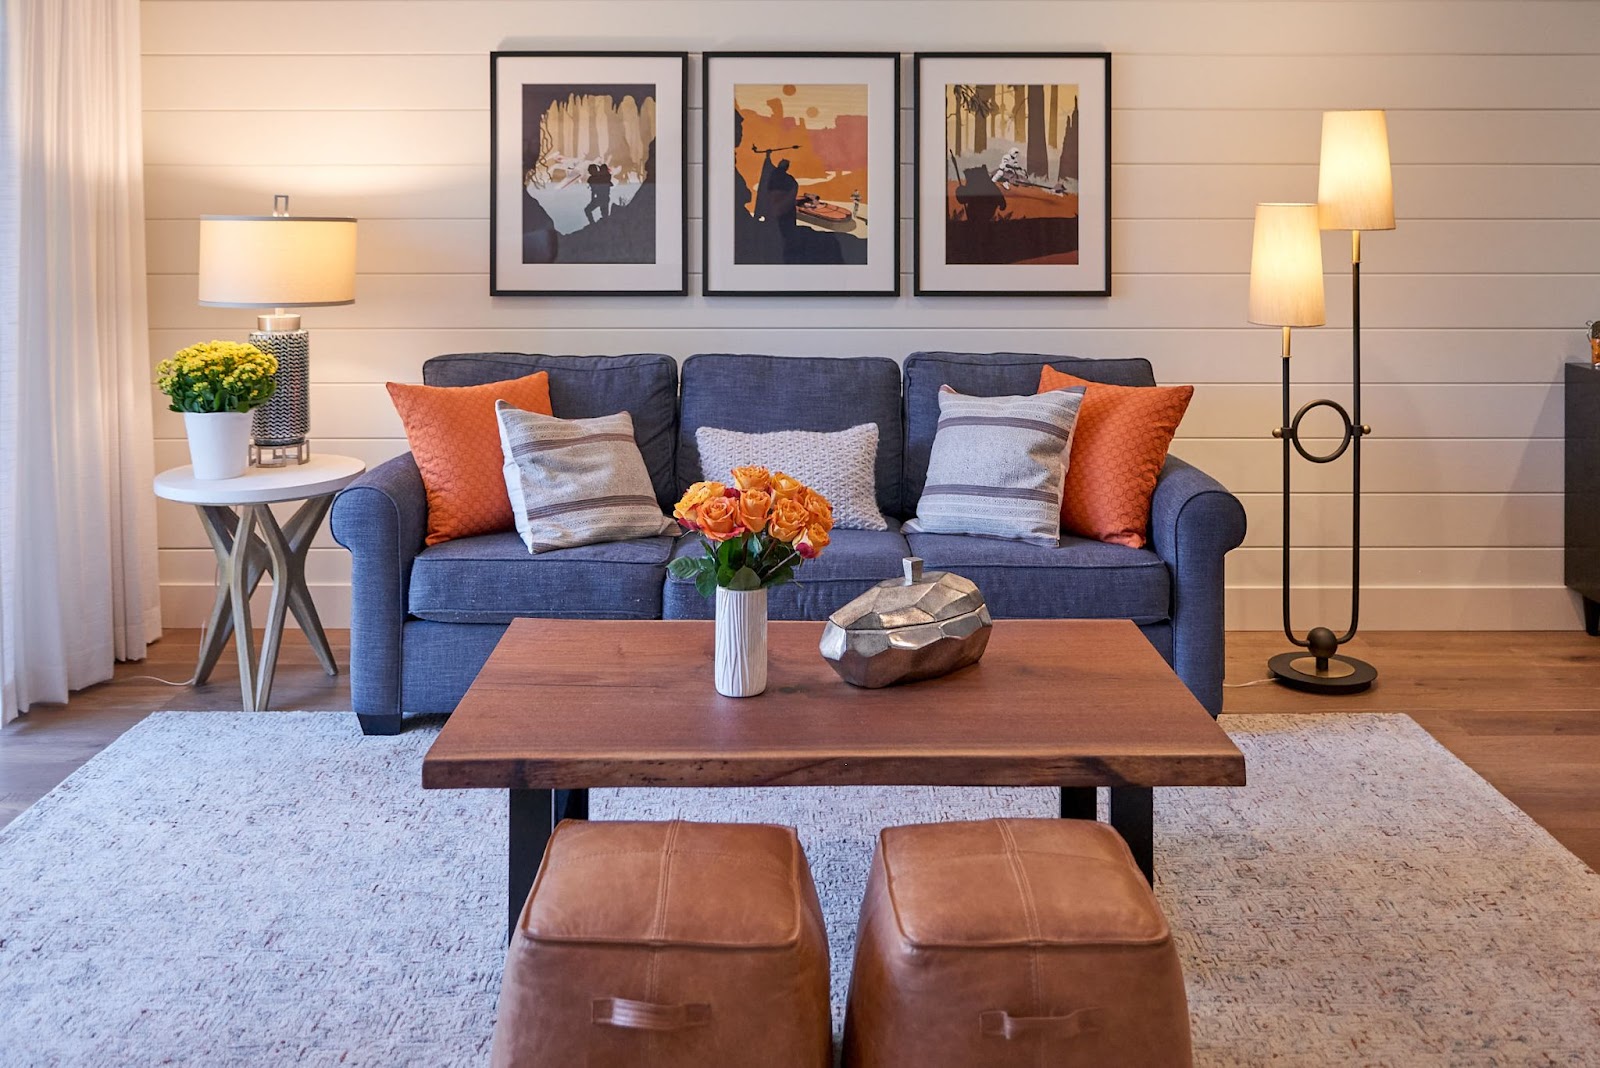 raashi-design-walnut-creek-ca-building-or-buying-home-with-welcoming-atmosphere-and-splashes-of-orange-and-blue